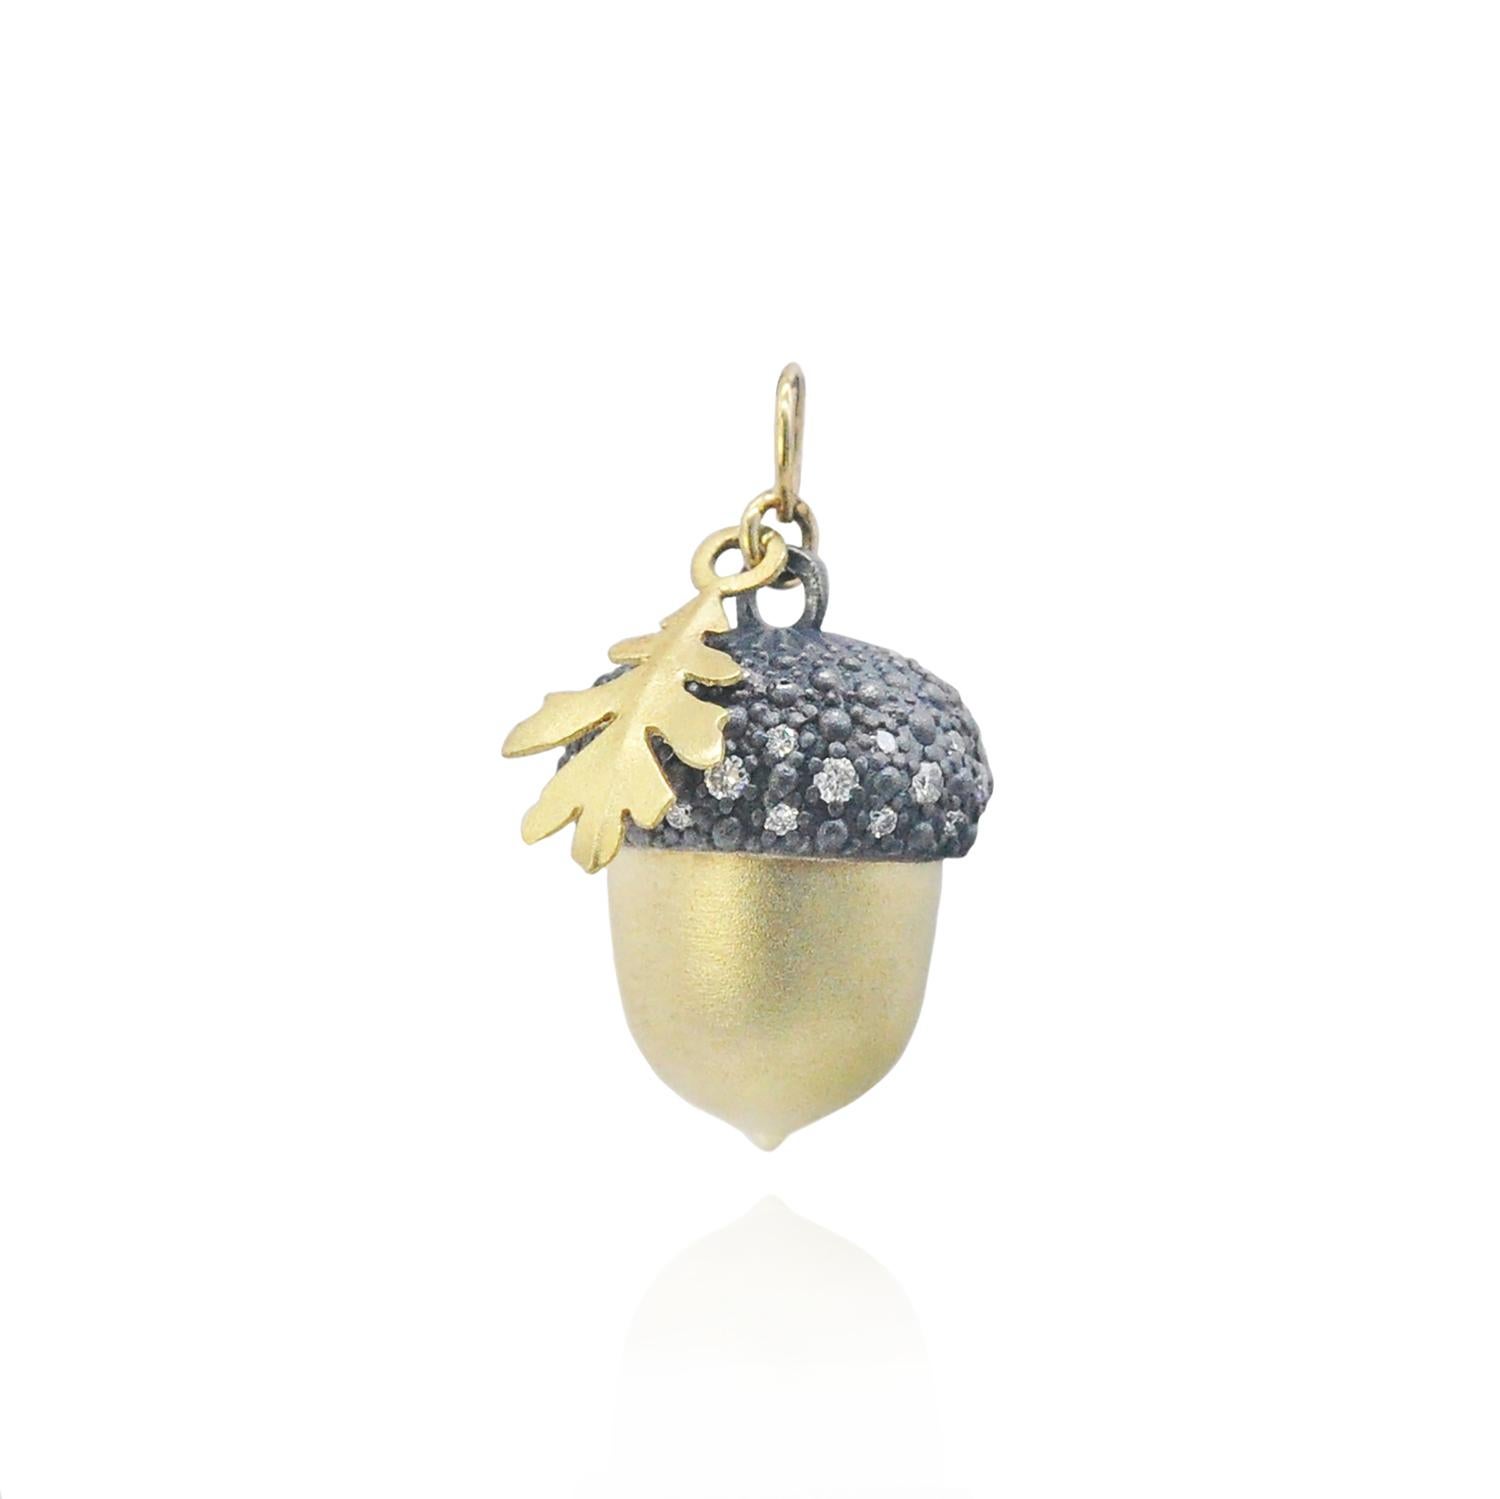 Two beautifully crafted 18k yellow gold and oxidized silver acorns sprinkled with pave set diamonds dangle from the ends of this gorgeous lariat necklace. 18k yellow gold oak leaves flutter down the 36